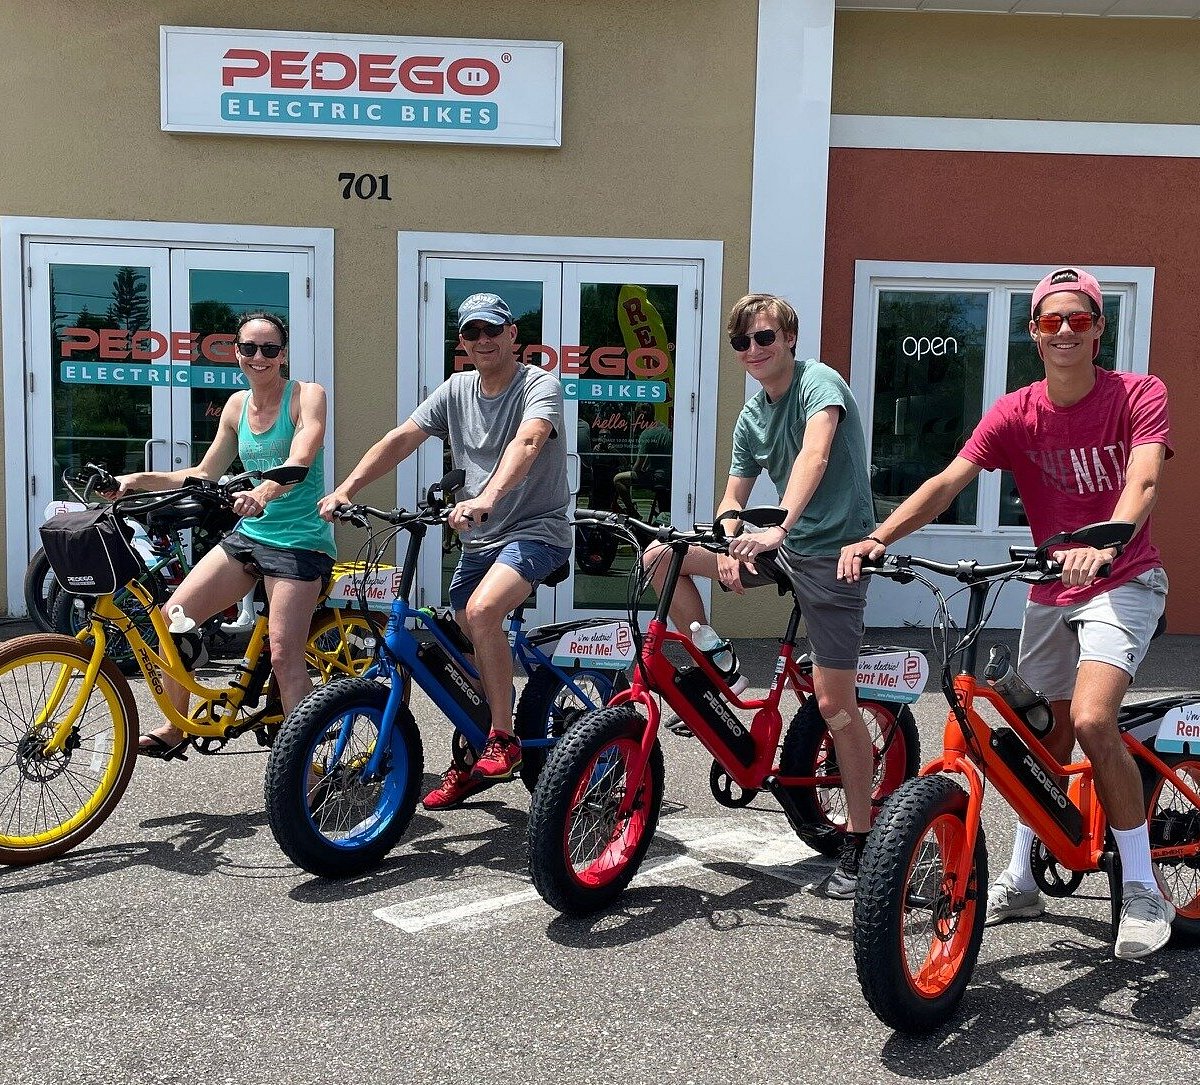 Pedego Electric Bikes New Smyrna Beach All You Need to Know BEFORE You Go